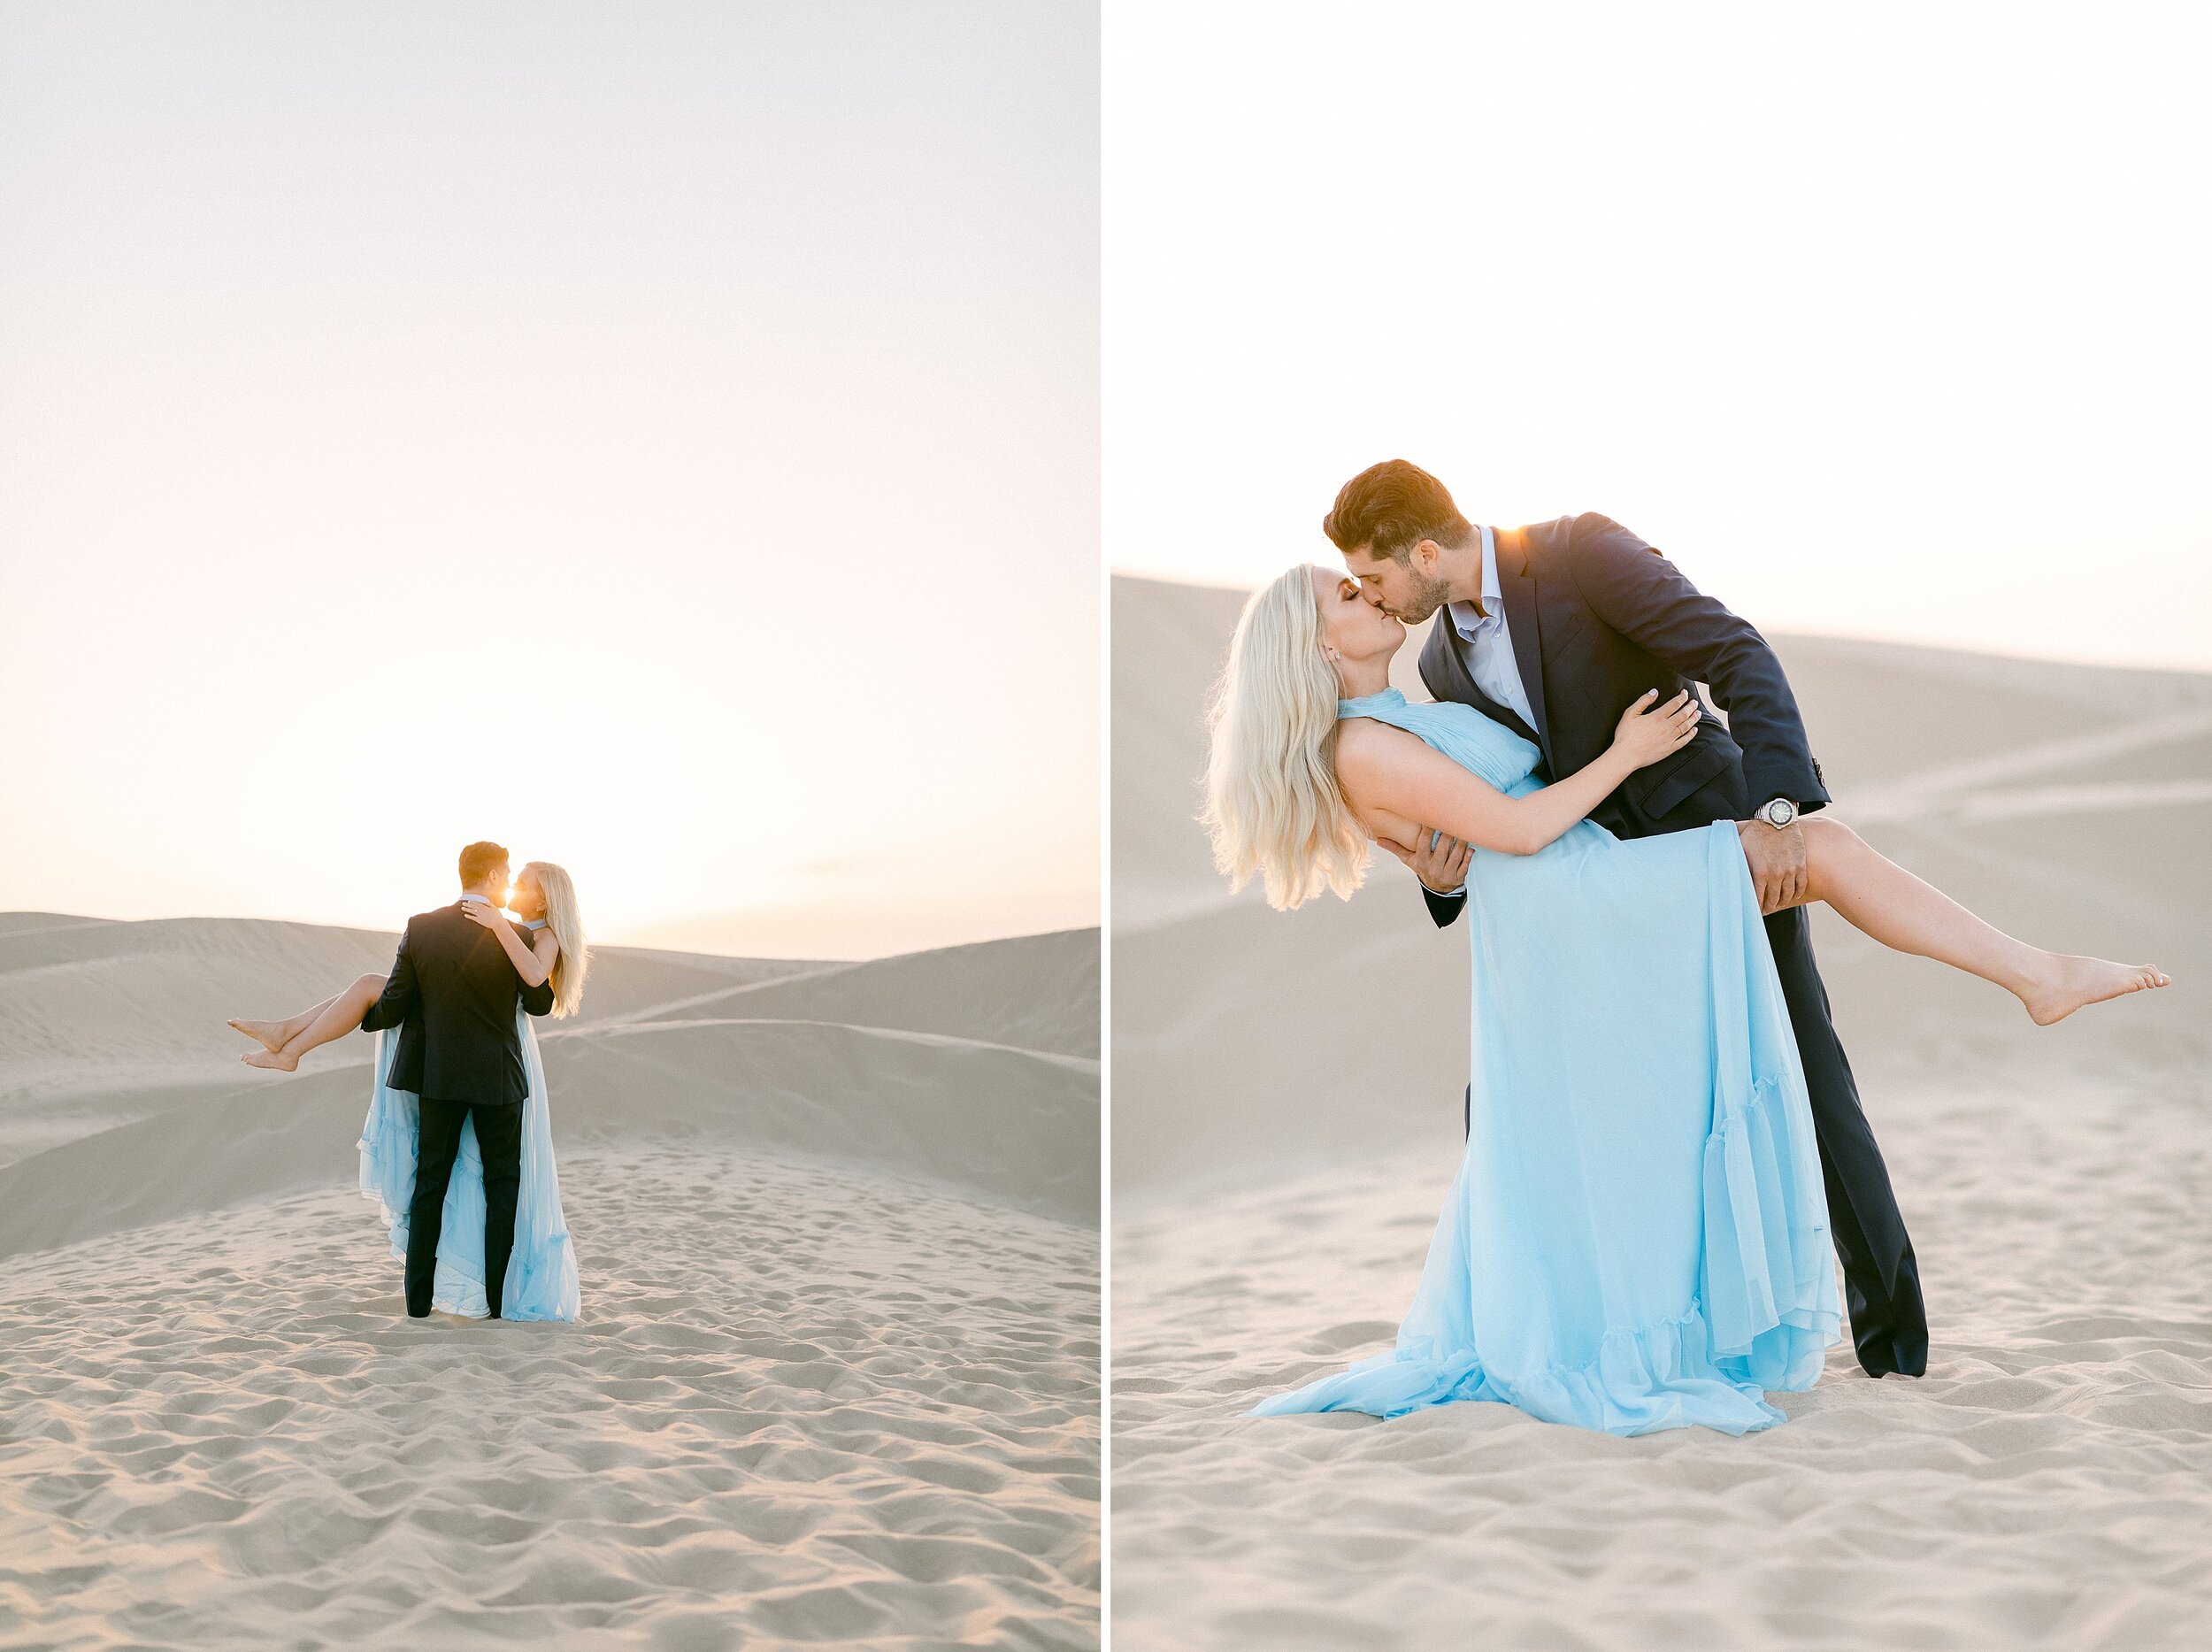 Man carries his fiance off to the sunset during their romantic sand dunes engagement session